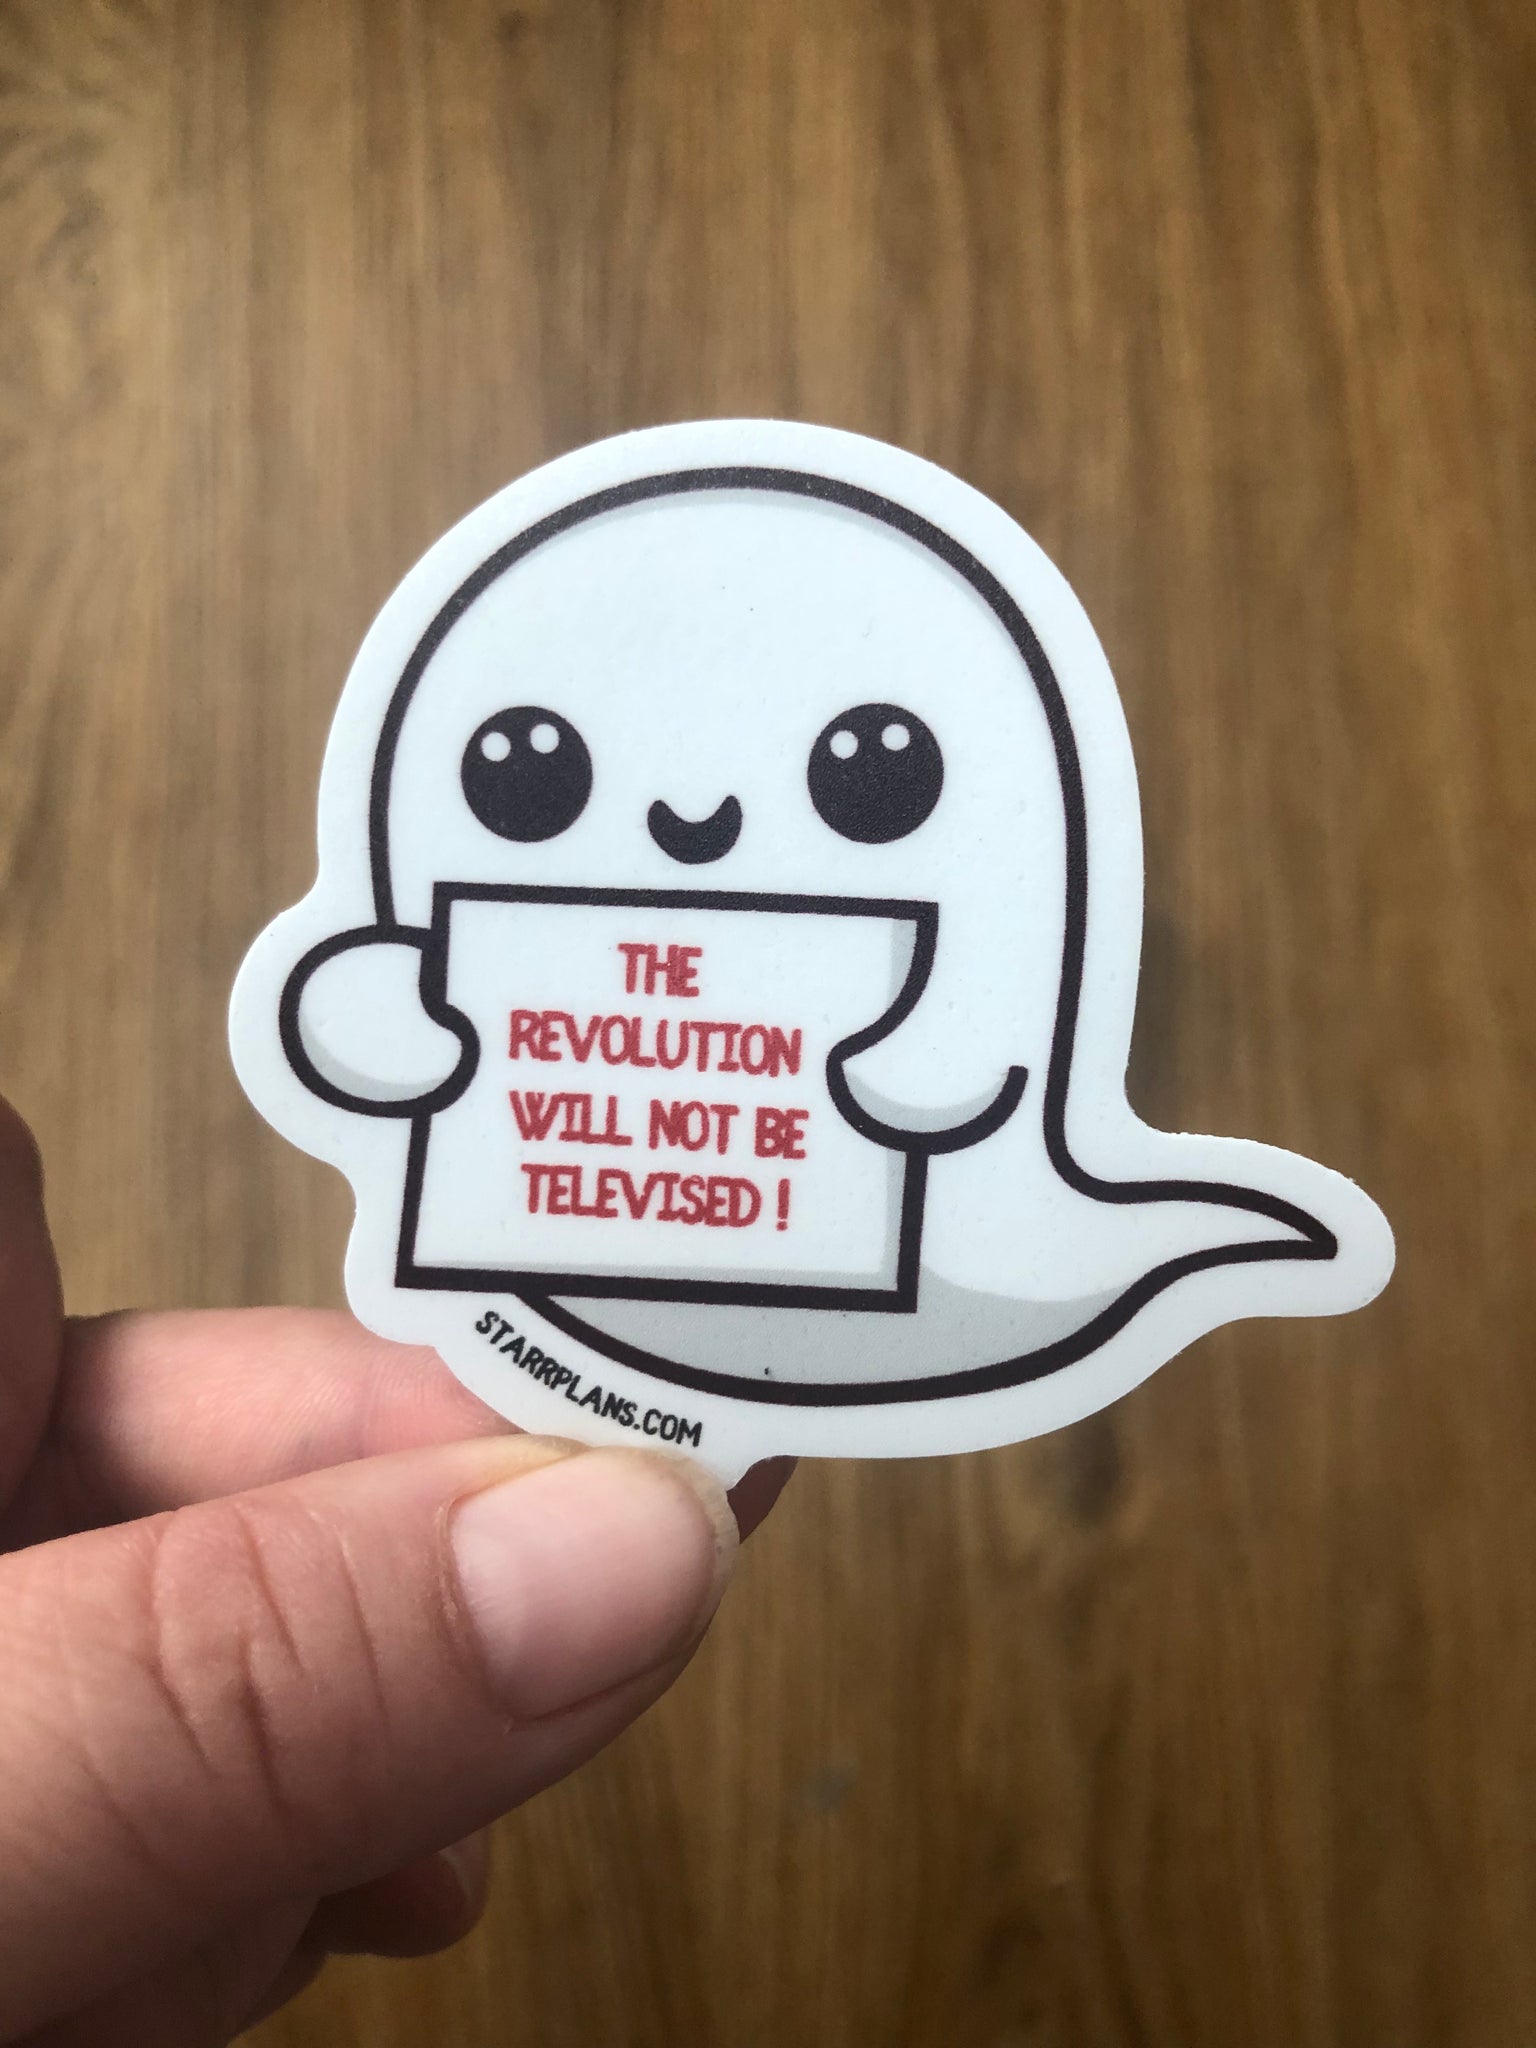 The Revolution Will Not Be Televised || Vinyl Sticker || Starr Plans Exclusive